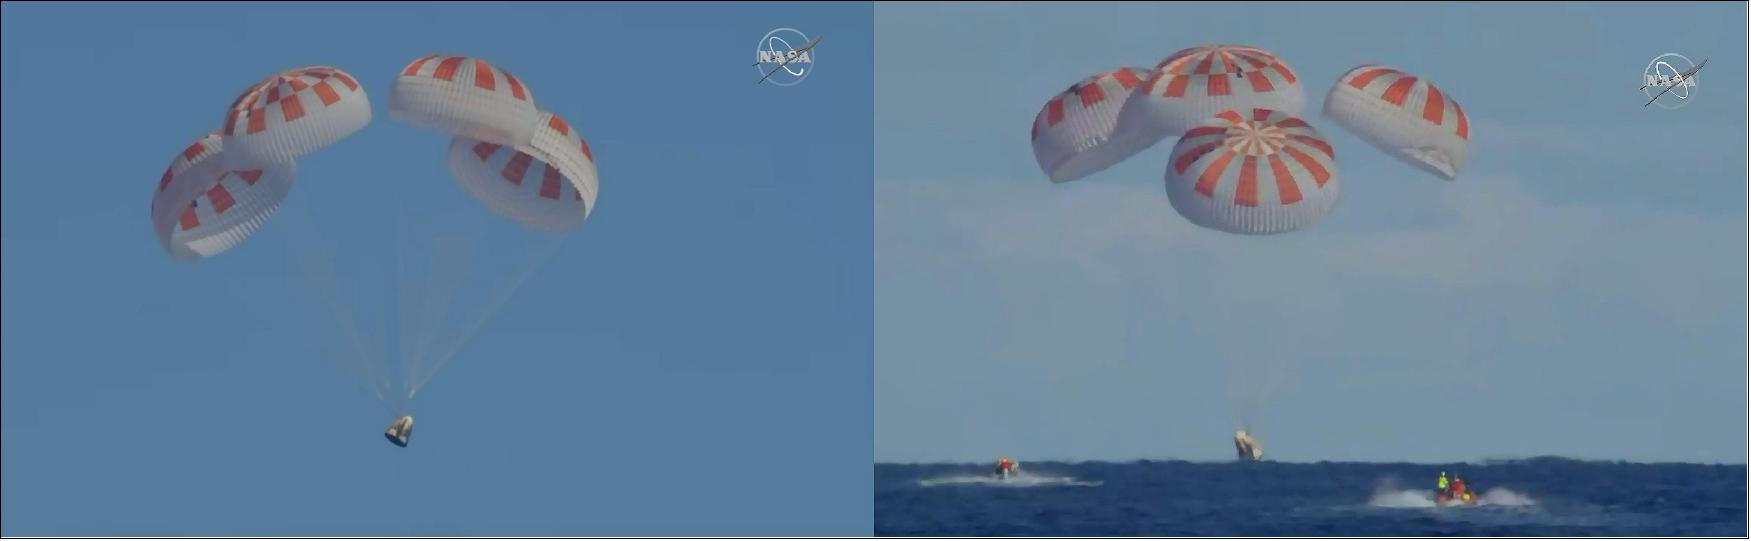 Figure 37: Completing an end-to-end uncrewed flight test, Demo-1, SpaceX’s Crew Dragon departed the International Space Station at 2:32 a.m. EST Friday, March 8, 2019, and splashed down at 8:45 a.m. in the Atlantic Ocean about 200 nautical miles off the Florida coast (image credit: NASA Television)